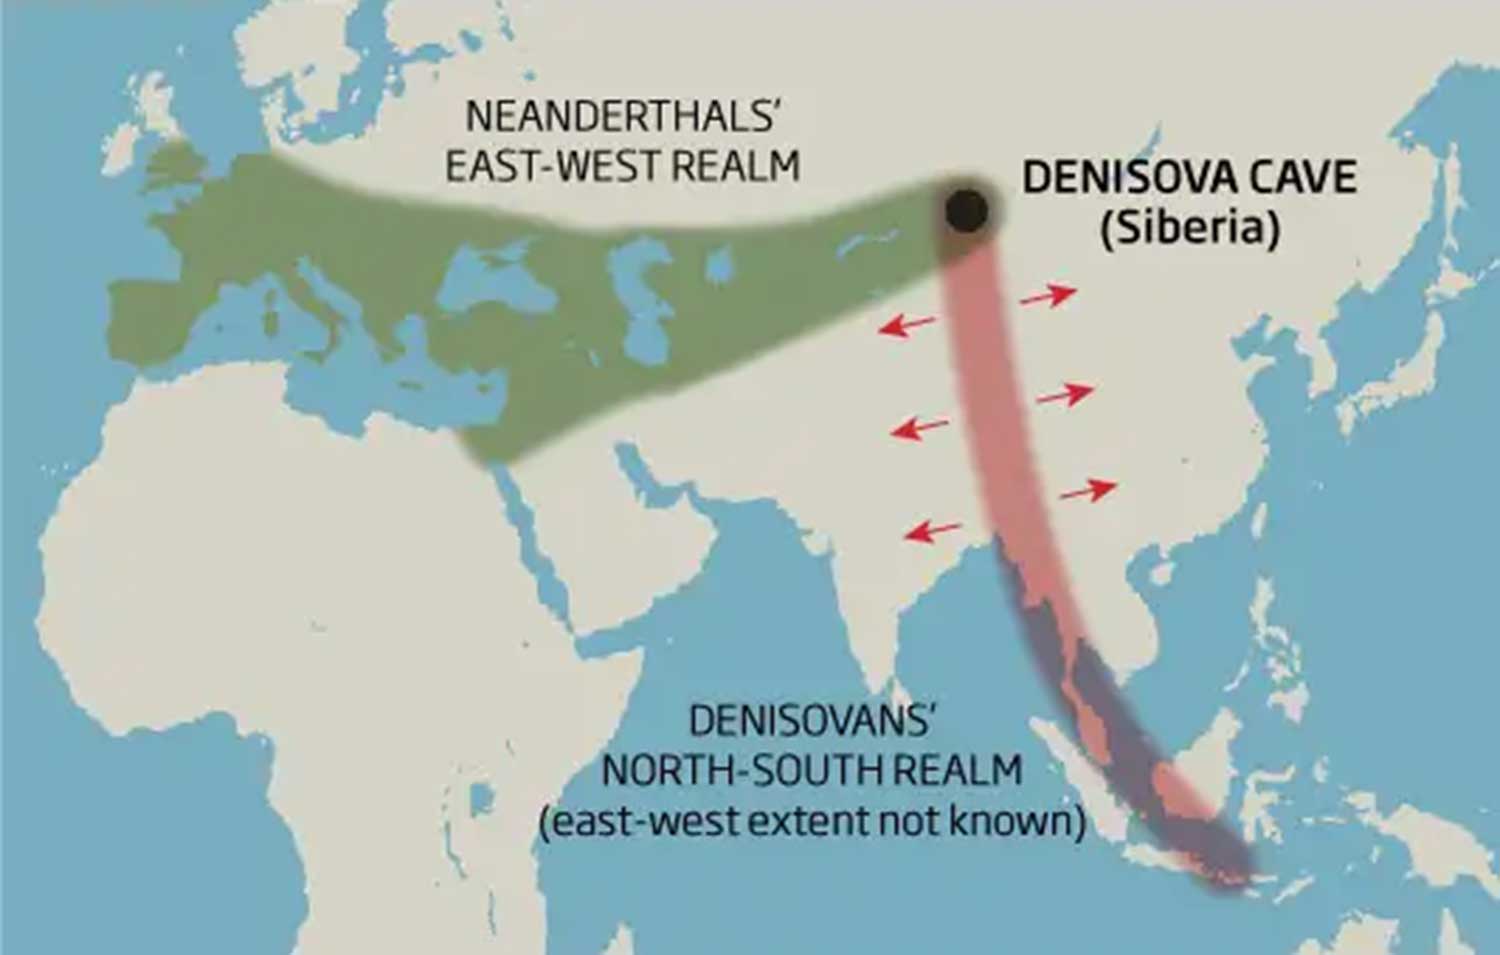 A map of Eurasia showing Neandertals' range in green stretching from Portugal to Denisova, and a red line connecting Denisova with Indonesia